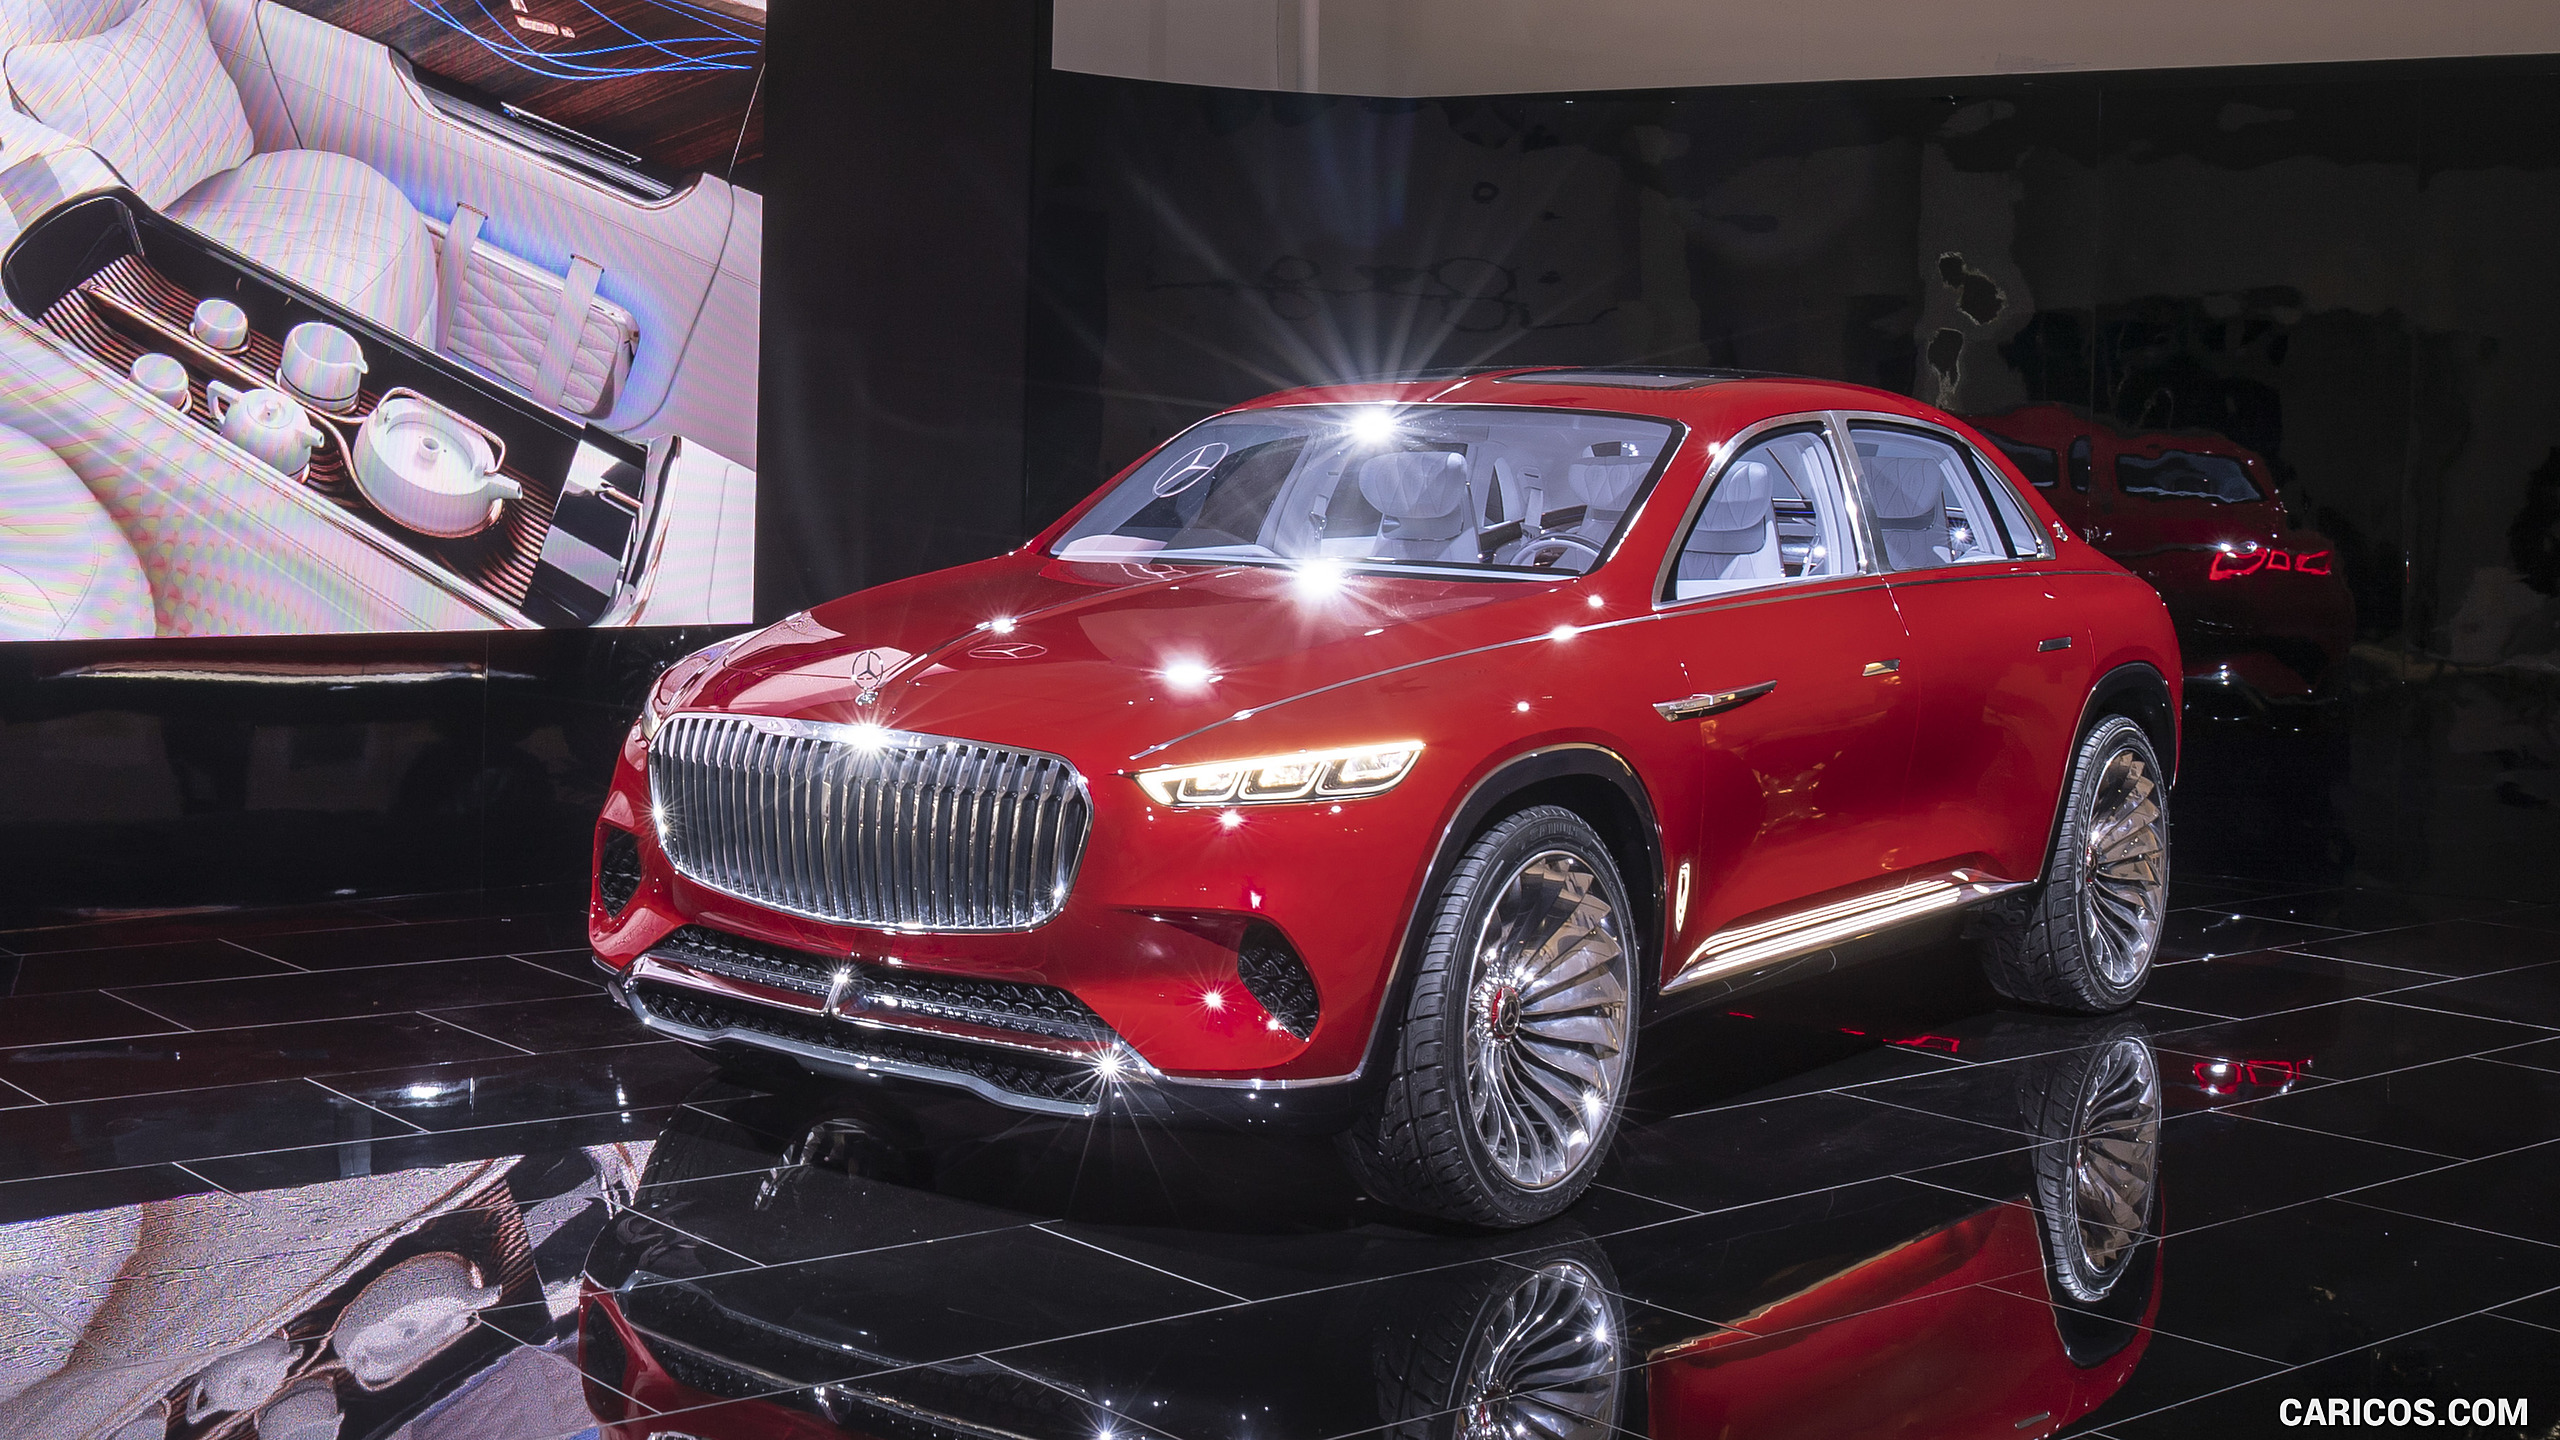 2018 Mercedes-Maybach Vision Ultimate Luxury SUV Concept - Front Three-Quarter, #7 of 41